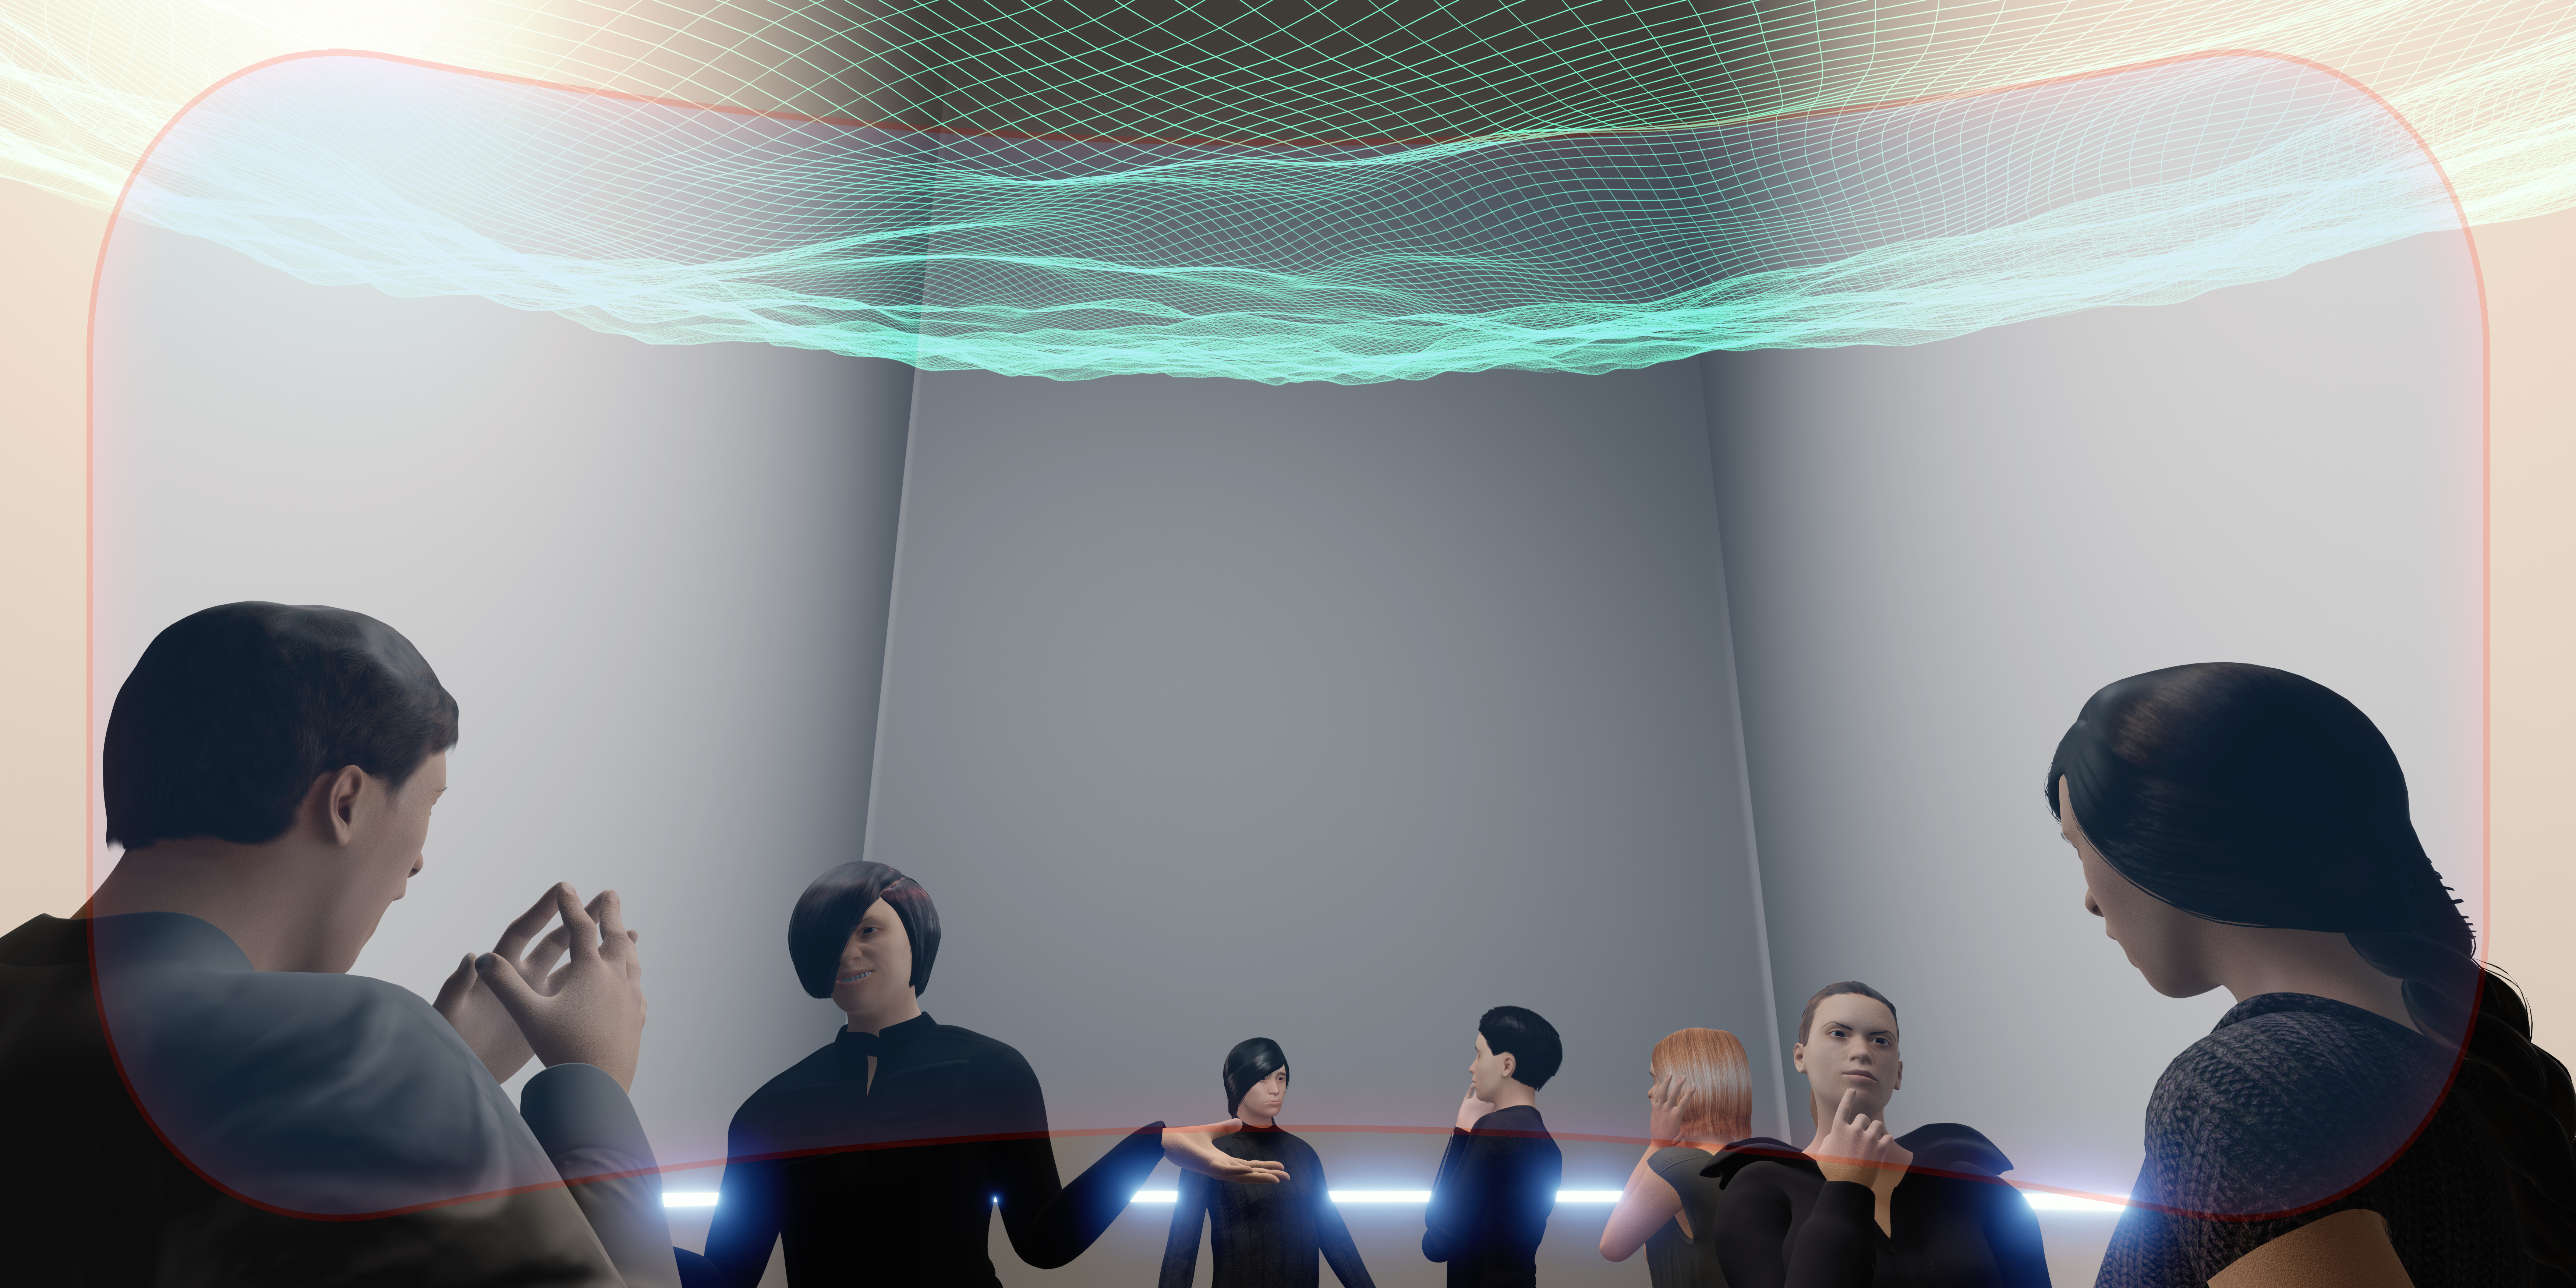 Metaverse Avatar Creation: How to Create a Metaverse Avatar - XR Today